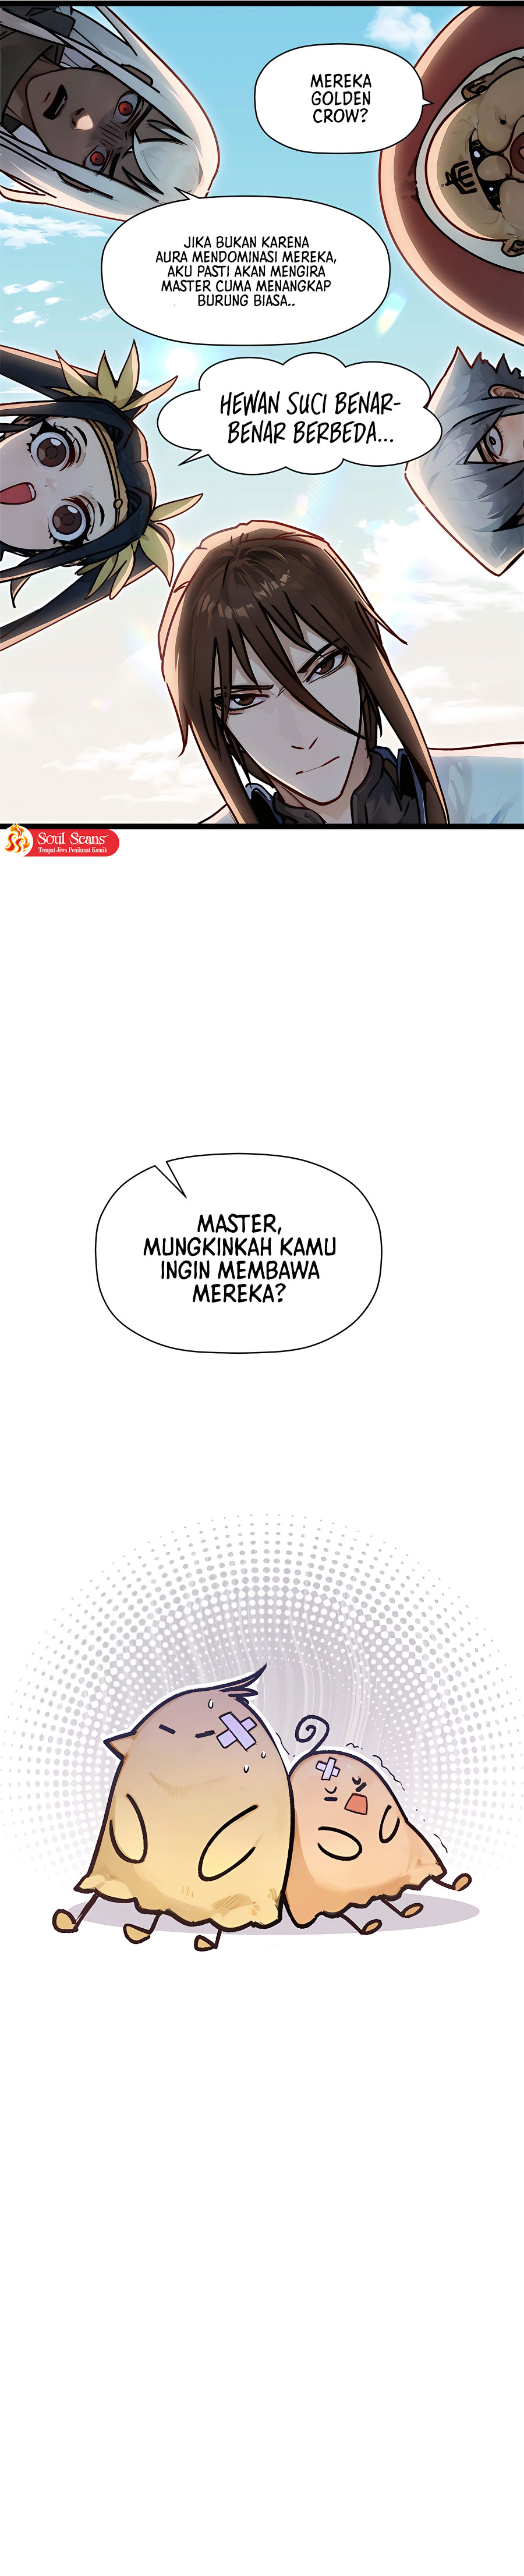 Dilarang COPAS - situs resmi www.mangacanblog.com - Komik top tier providence secretly cultivate for a thousand years 149 - chapter 149 150 Indonesia top tier providence secretly cultivate for a thousand years 149 - chapter 149 Terbaru 13|Baca Manga Komik Indonesia|Mangacan